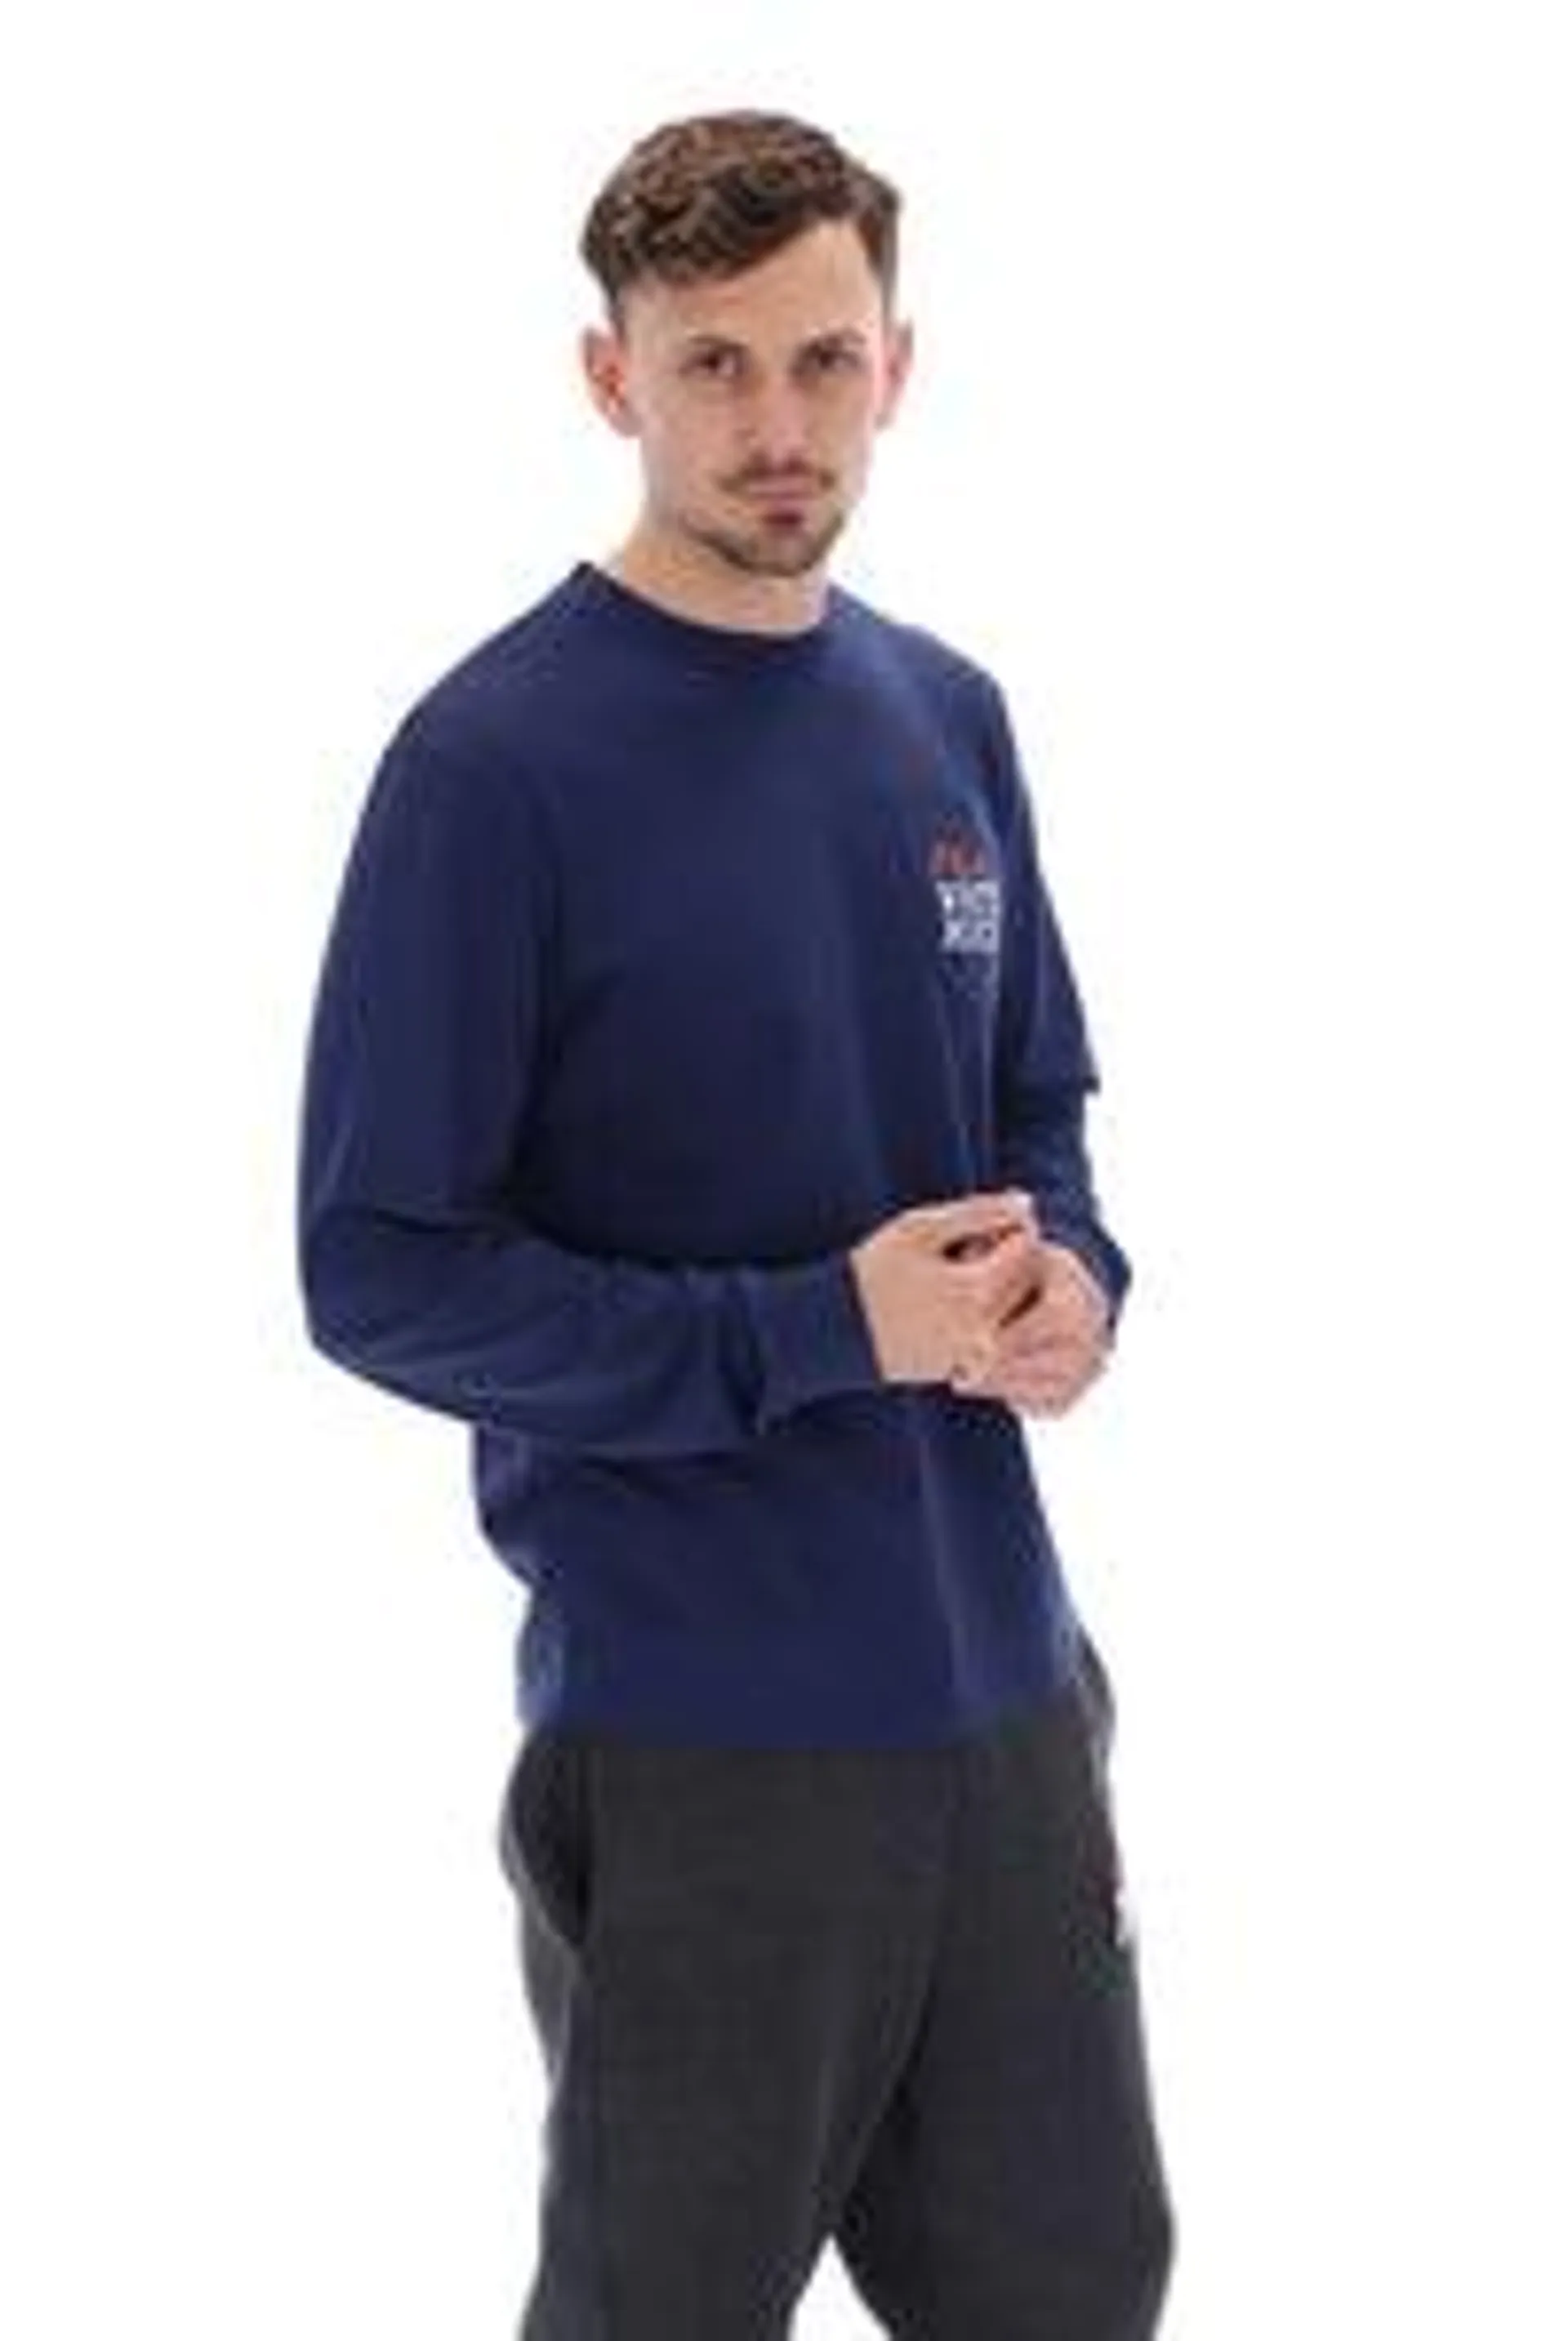 Franklin Graphic Long Sleeve Top